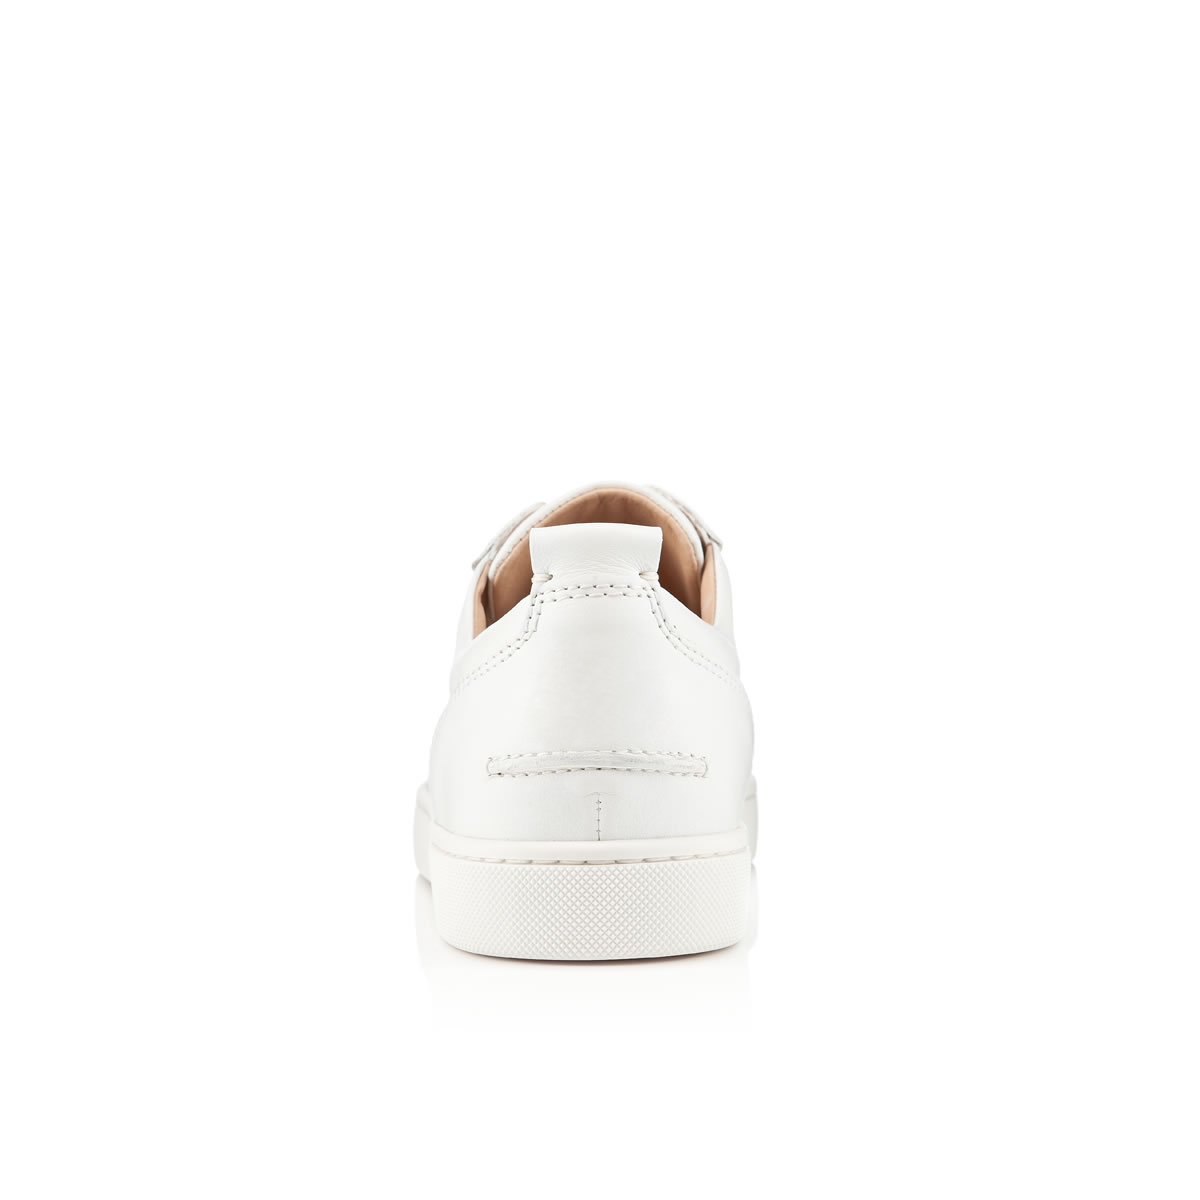 Louis Junior Spikes - Sneakers - Calf leather and spikes - White 